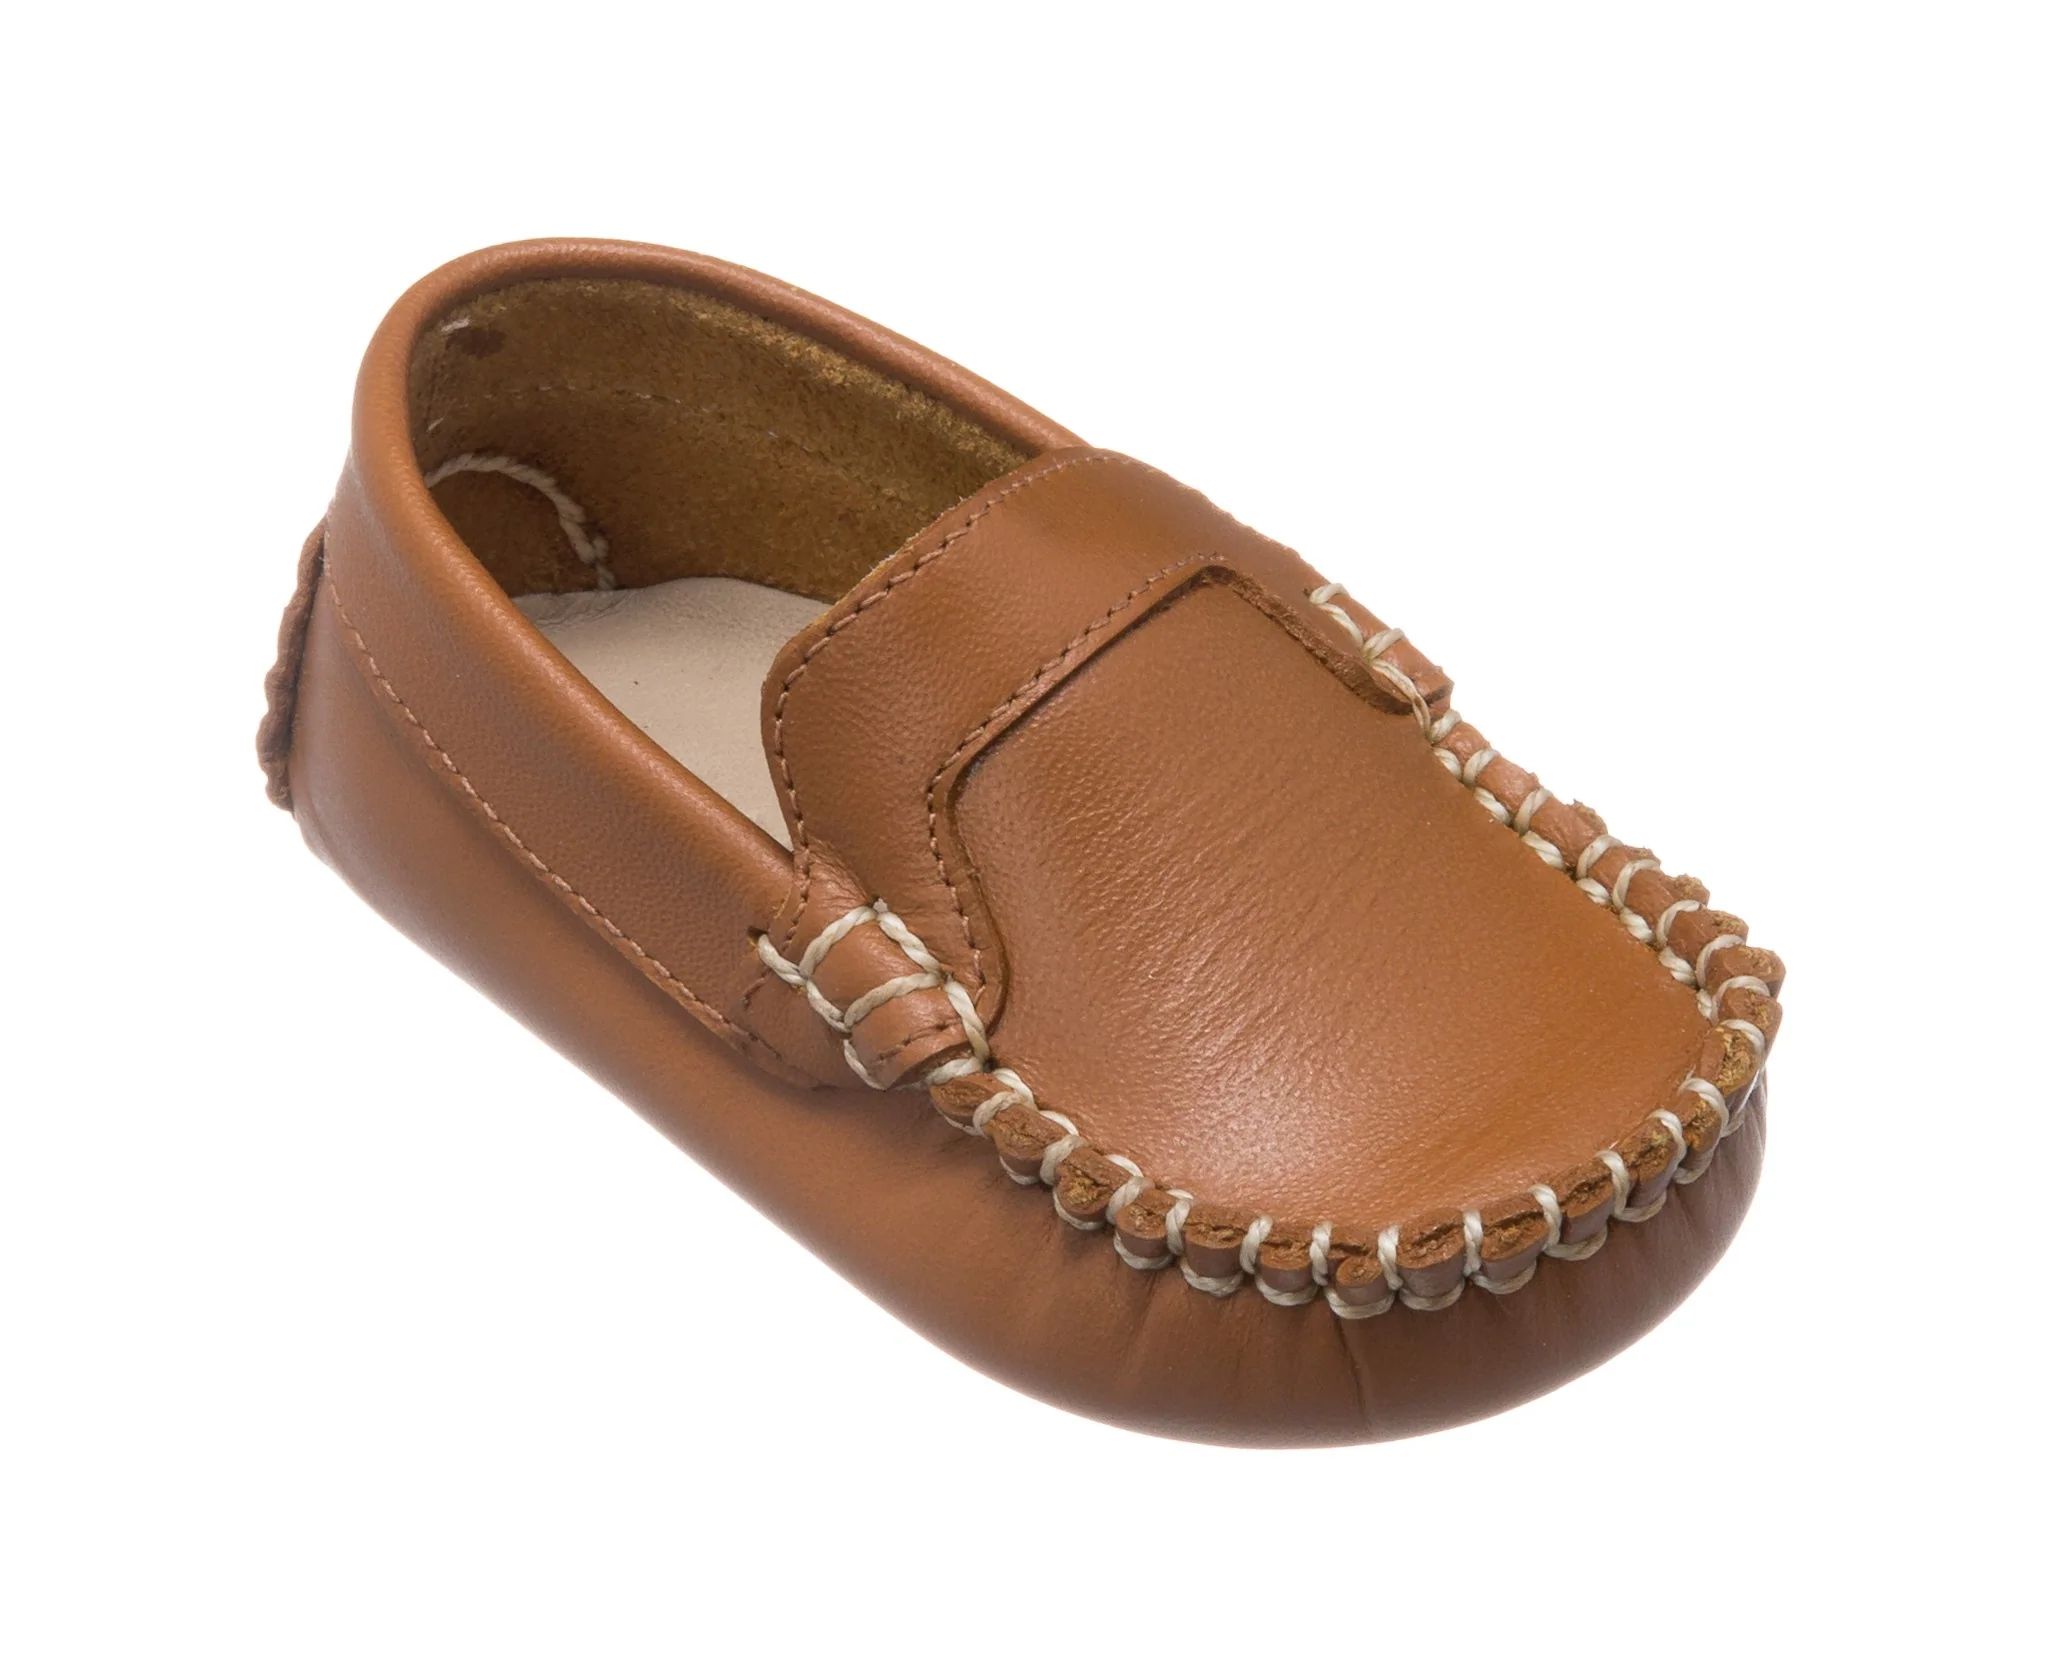 Elephantito Baby Moccasin - Natural Leather | The Beaufort Bonnet Company